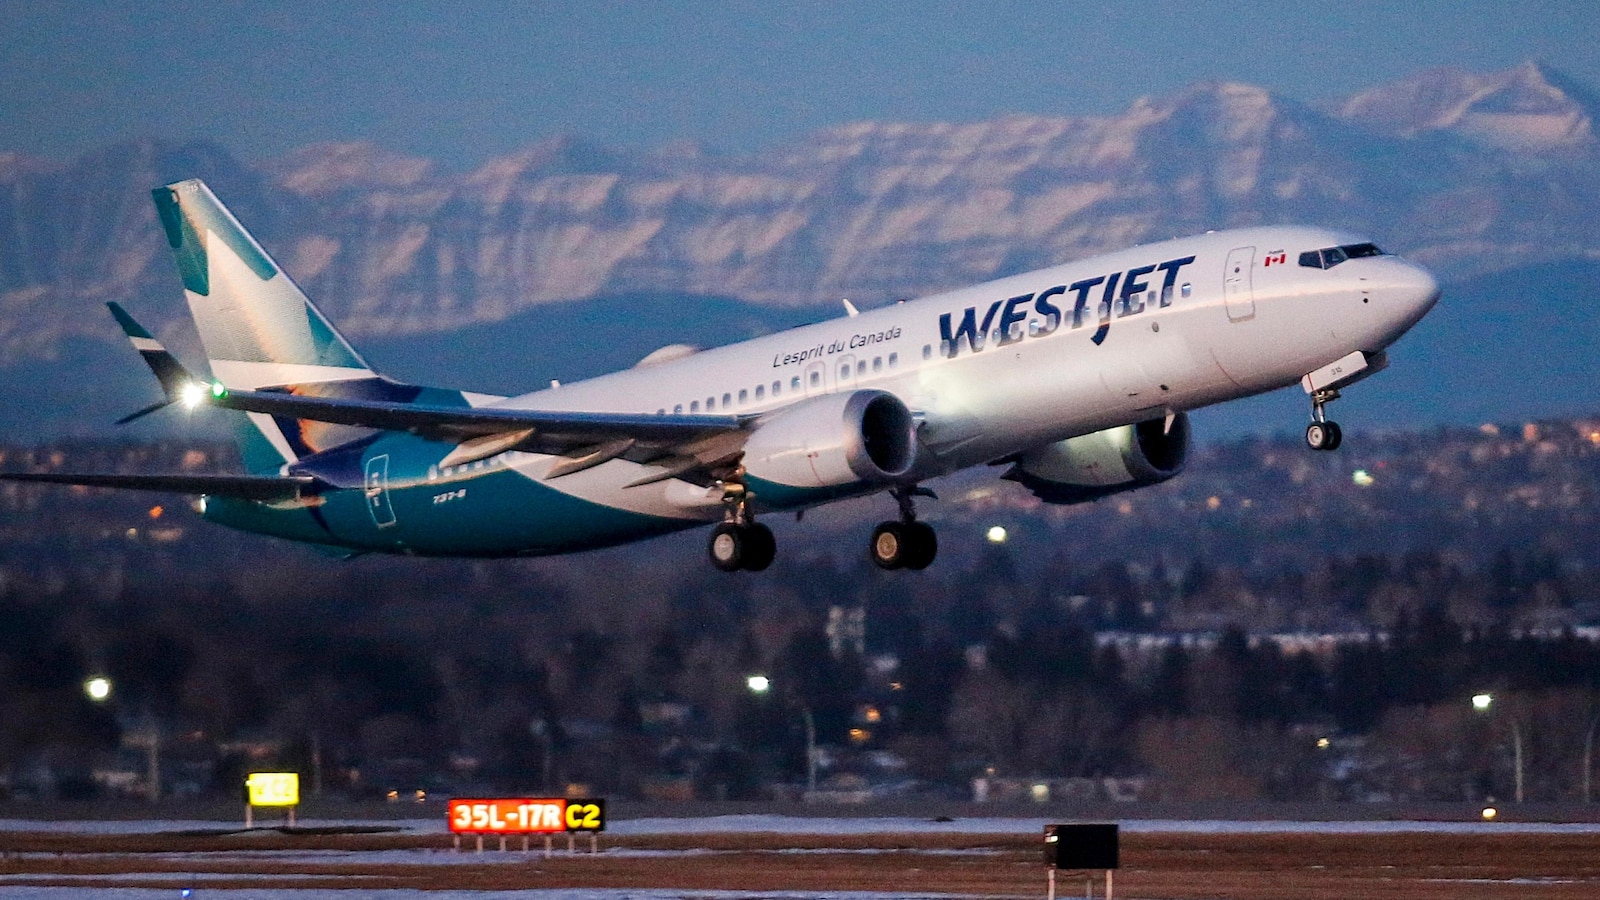 More WestJet flight cancellations as airline strike hits thousands of travelers